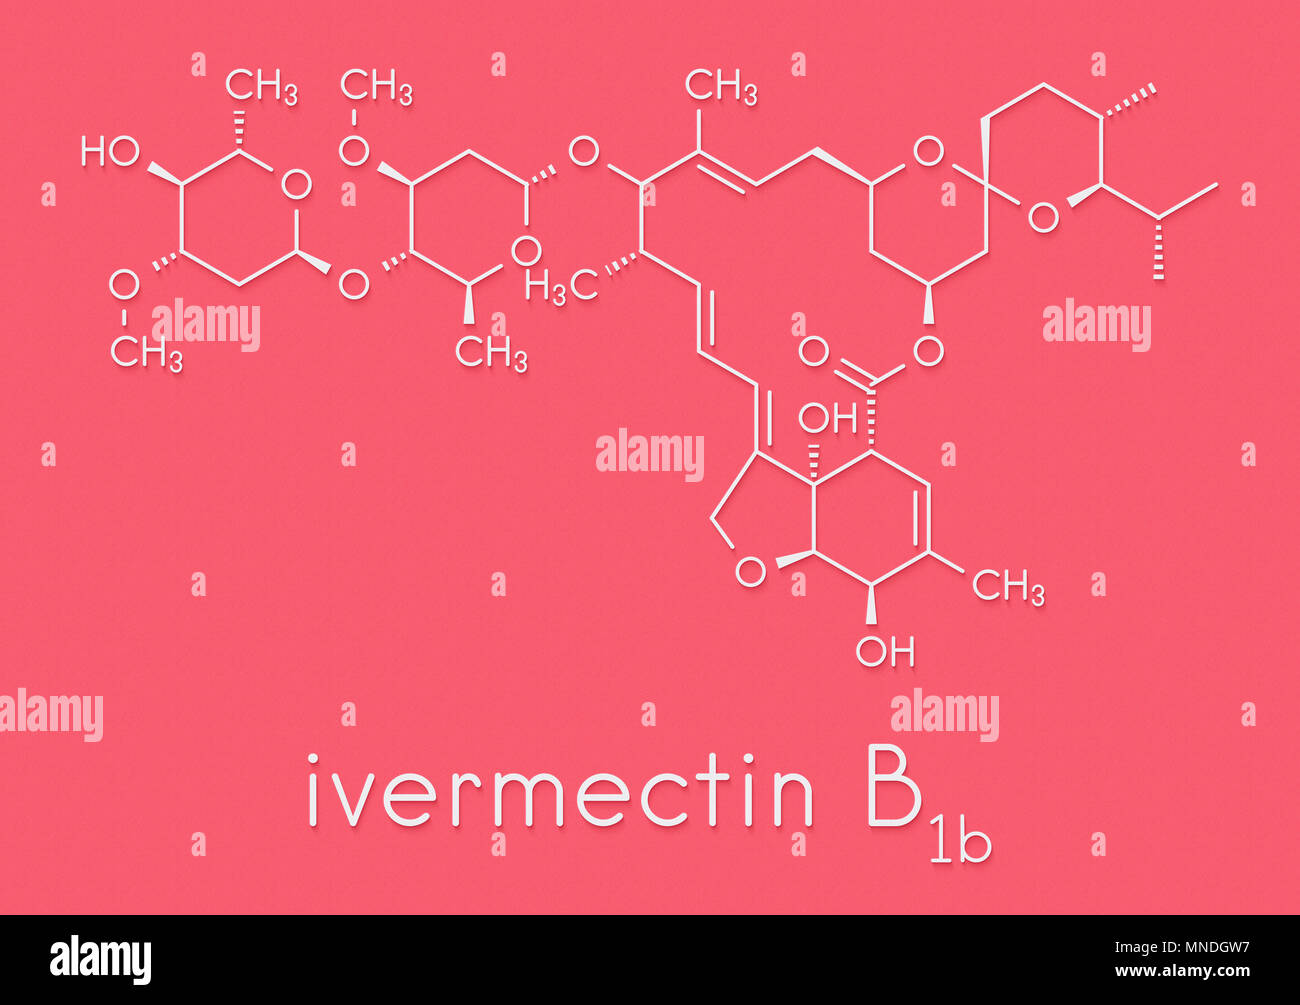 Ivermectin antiparasitic drug molecule. Used in treatment of river blindness, scabies, head lice, etc. Skeletal formula. Stock Photo